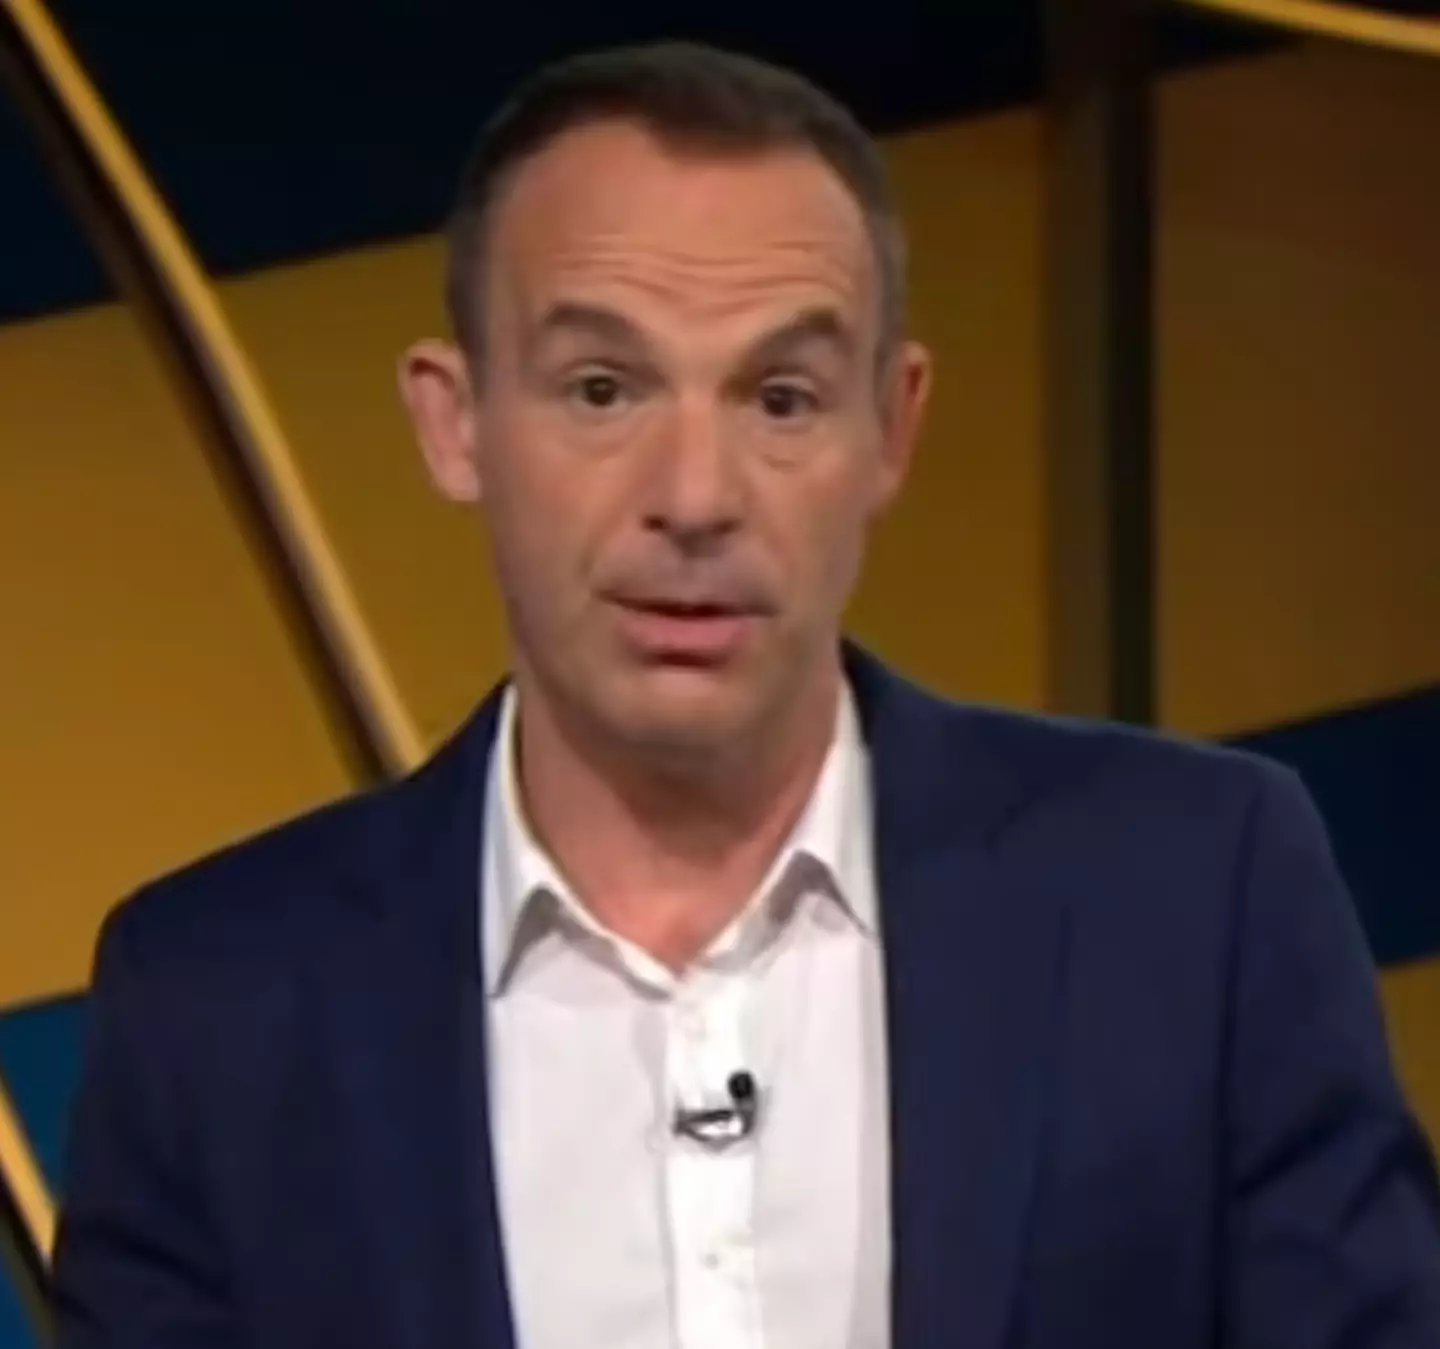 Martin Lewis has shared a warning to anybody with a UK bank account.